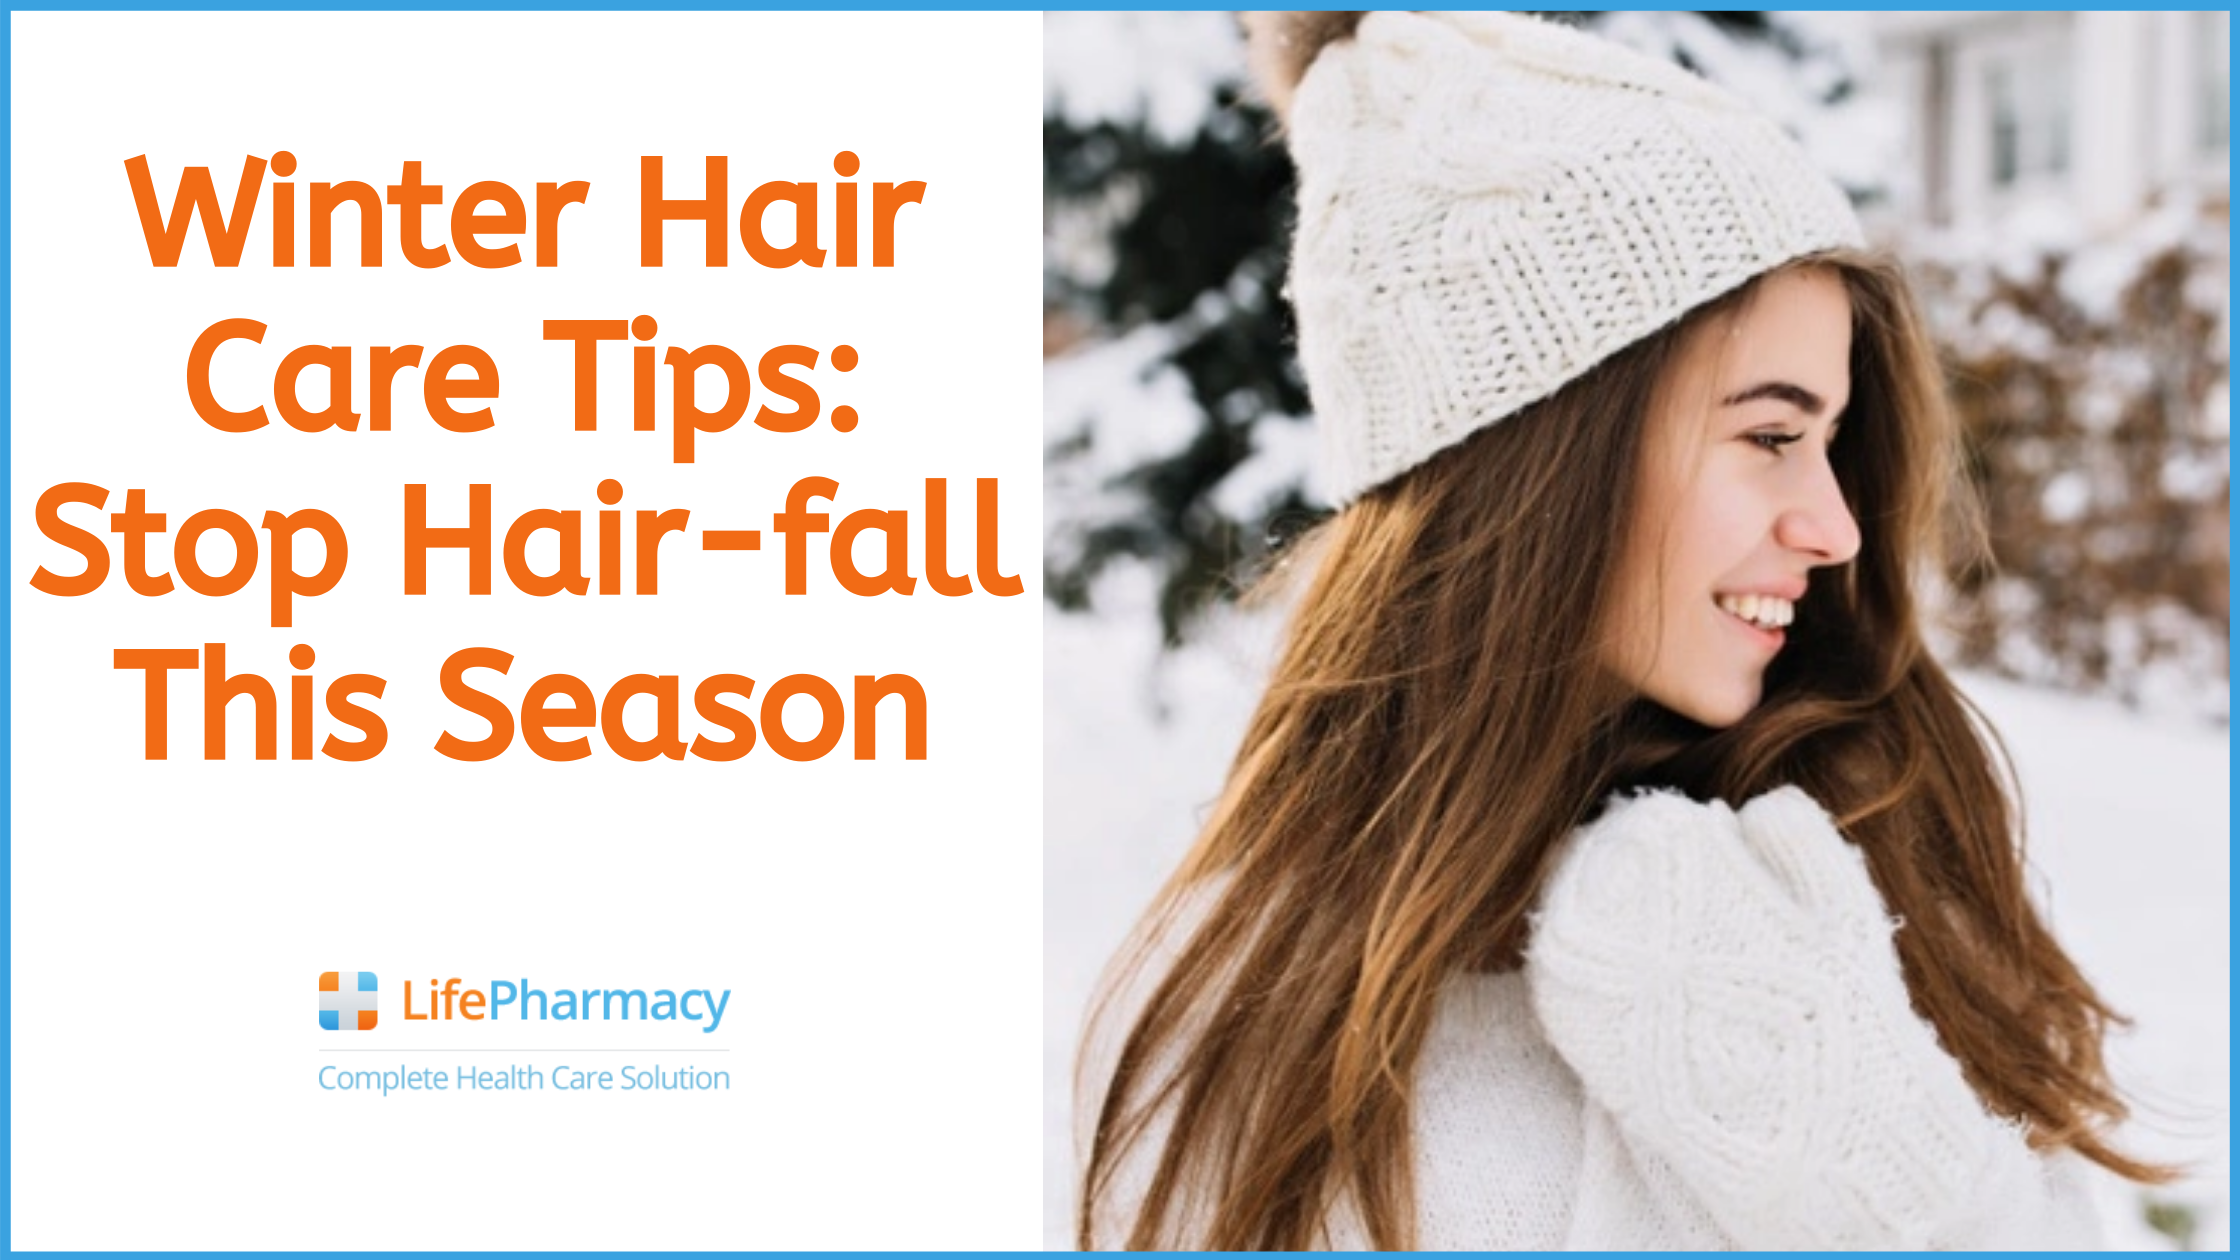 Winter Hair Care Tips for Blonde Hair - wide 4